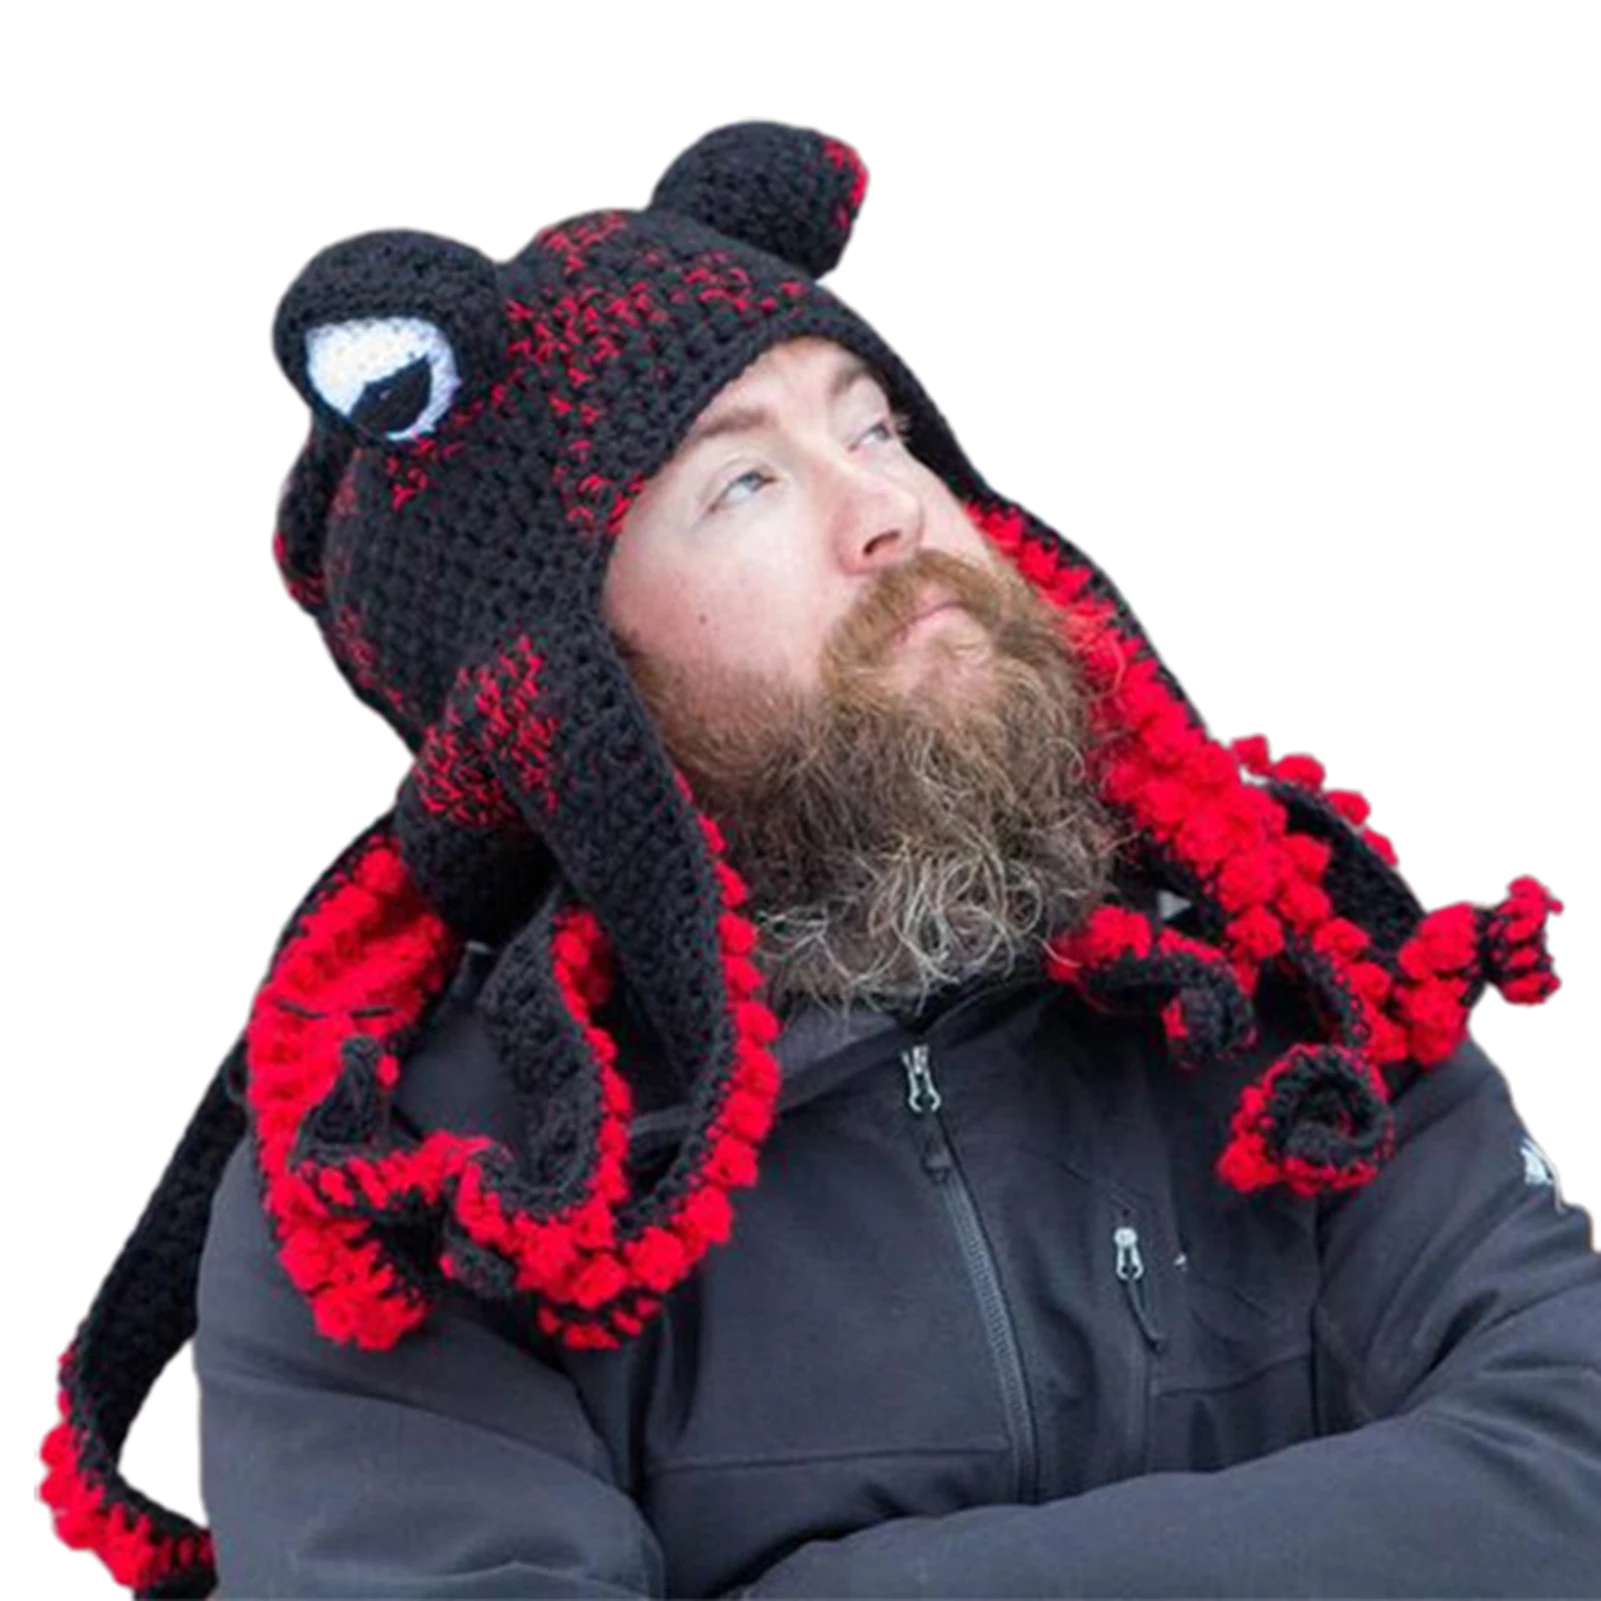 Octopus Beard Hand Weave Knit Wool Hats Men Christmas Cosplay Party Funny Tricky Headgear winter Warm Couples Hat Dropshipping images - 6